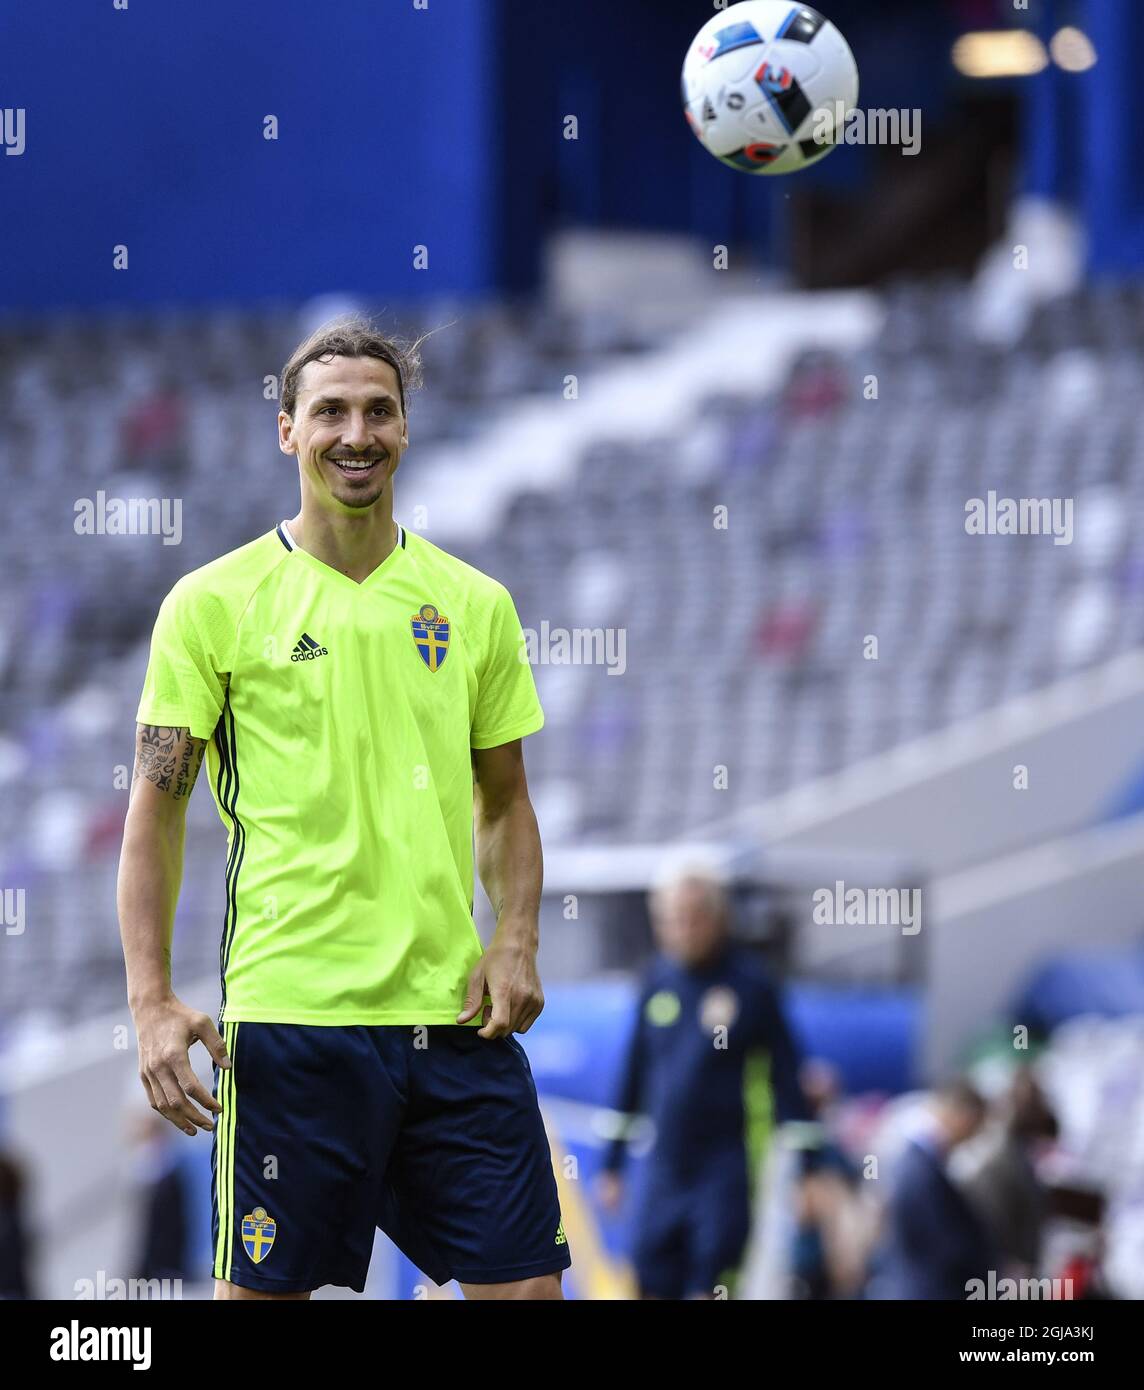 FILE 2016-06-16 Swedish soccer player Zlatan Ibrahimovic smiles during a training session in Toulouse during the UEFA Euro 2016, on June 16, 2016. Zlatan Ibrahimovic said on June 30, 2016 that he is joining Manchester United. Photo: Anders Wiklund / TT / Kod 10040  Stock Photo